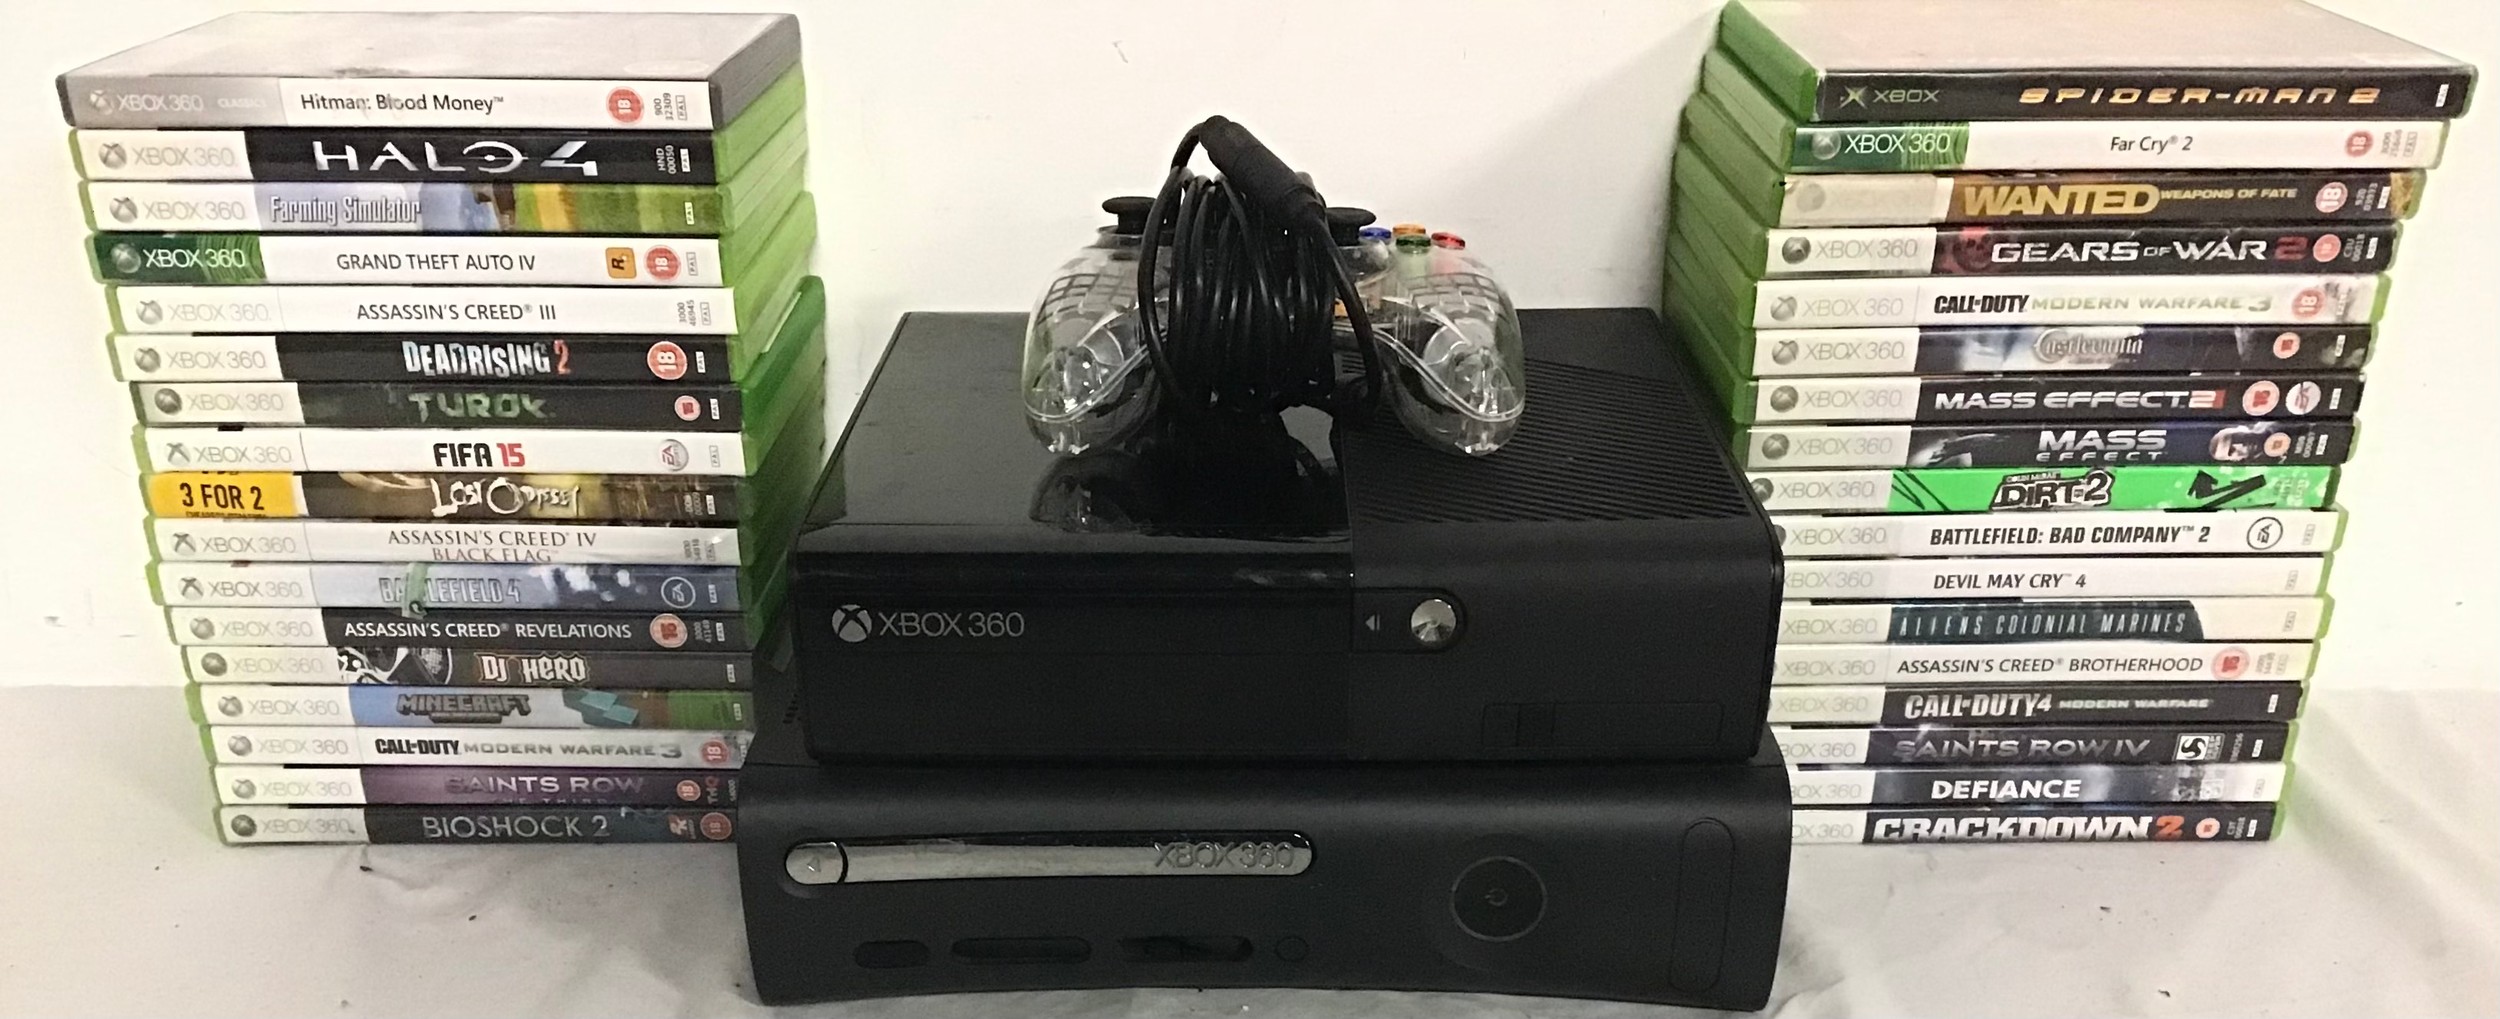 COLLECTION OF 2 X XBOX CONSOLES AND GAMES. In total we have 2 x Xbox 360 machines along with 1